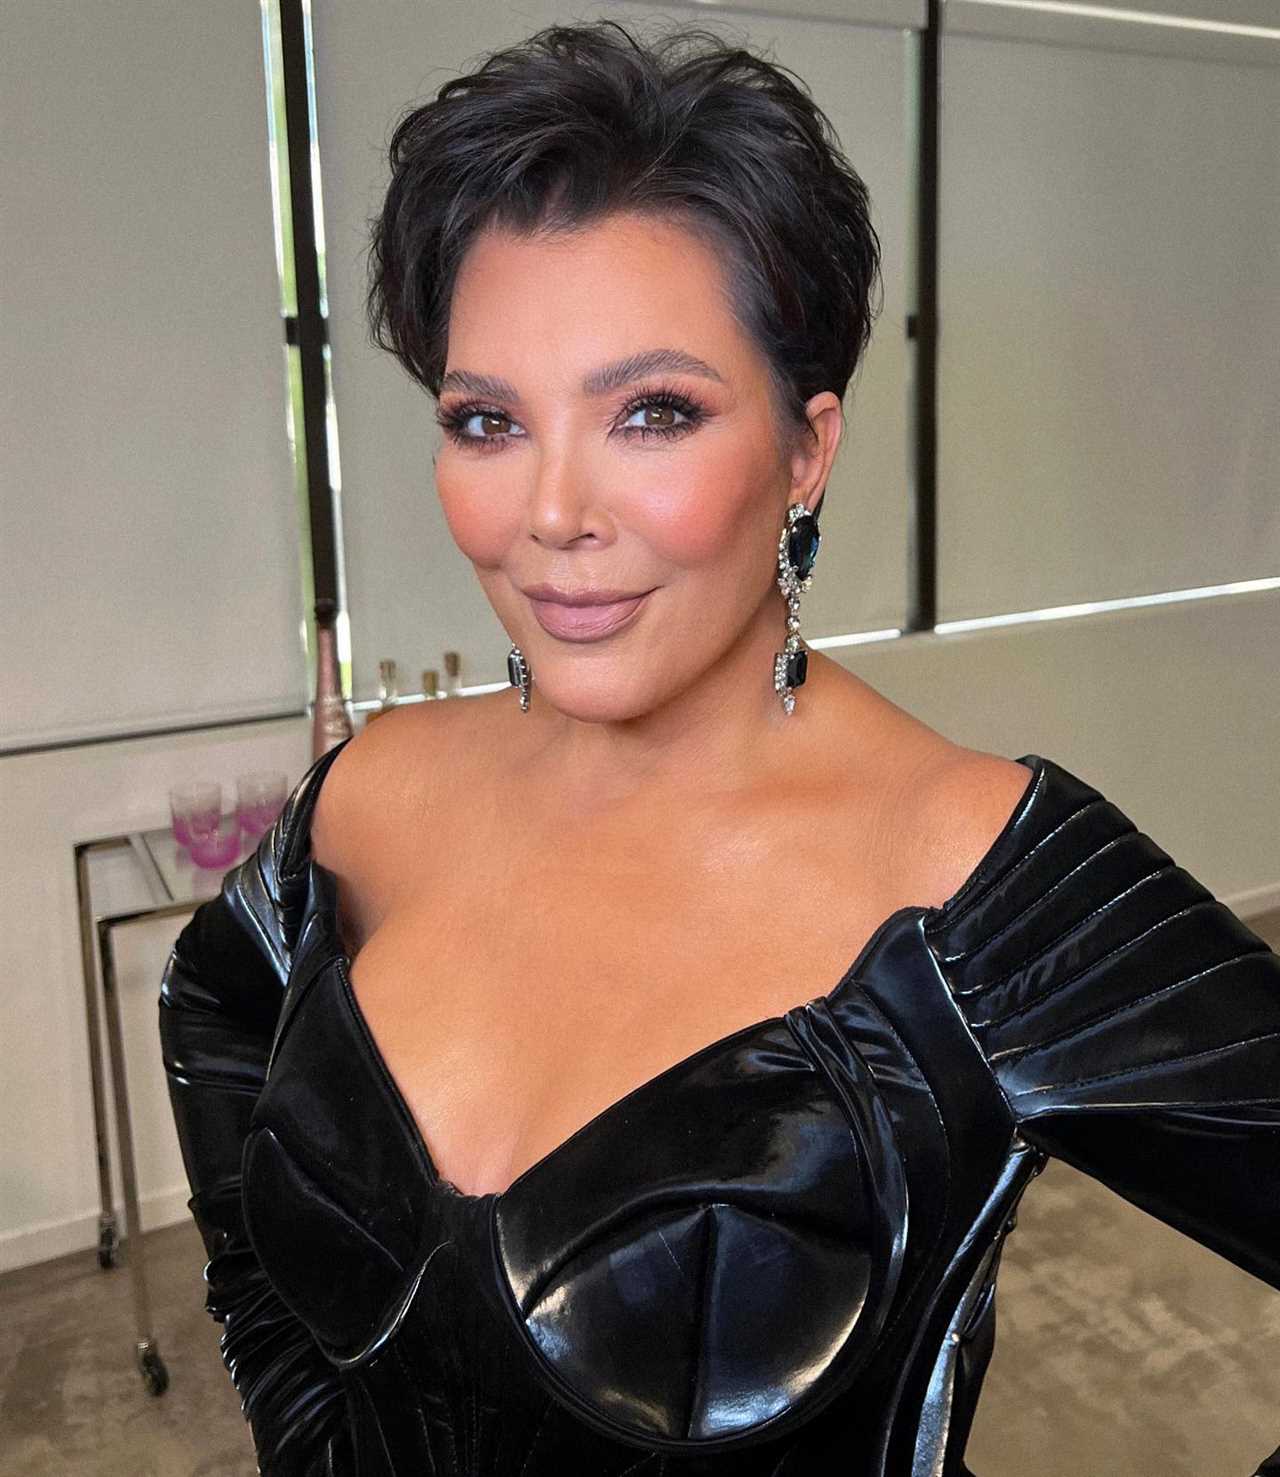 Kris Jenner sparks engagement rumors with Corey Gamble as fans spot ‘huge giveaway’ in jaw-dropping new photo